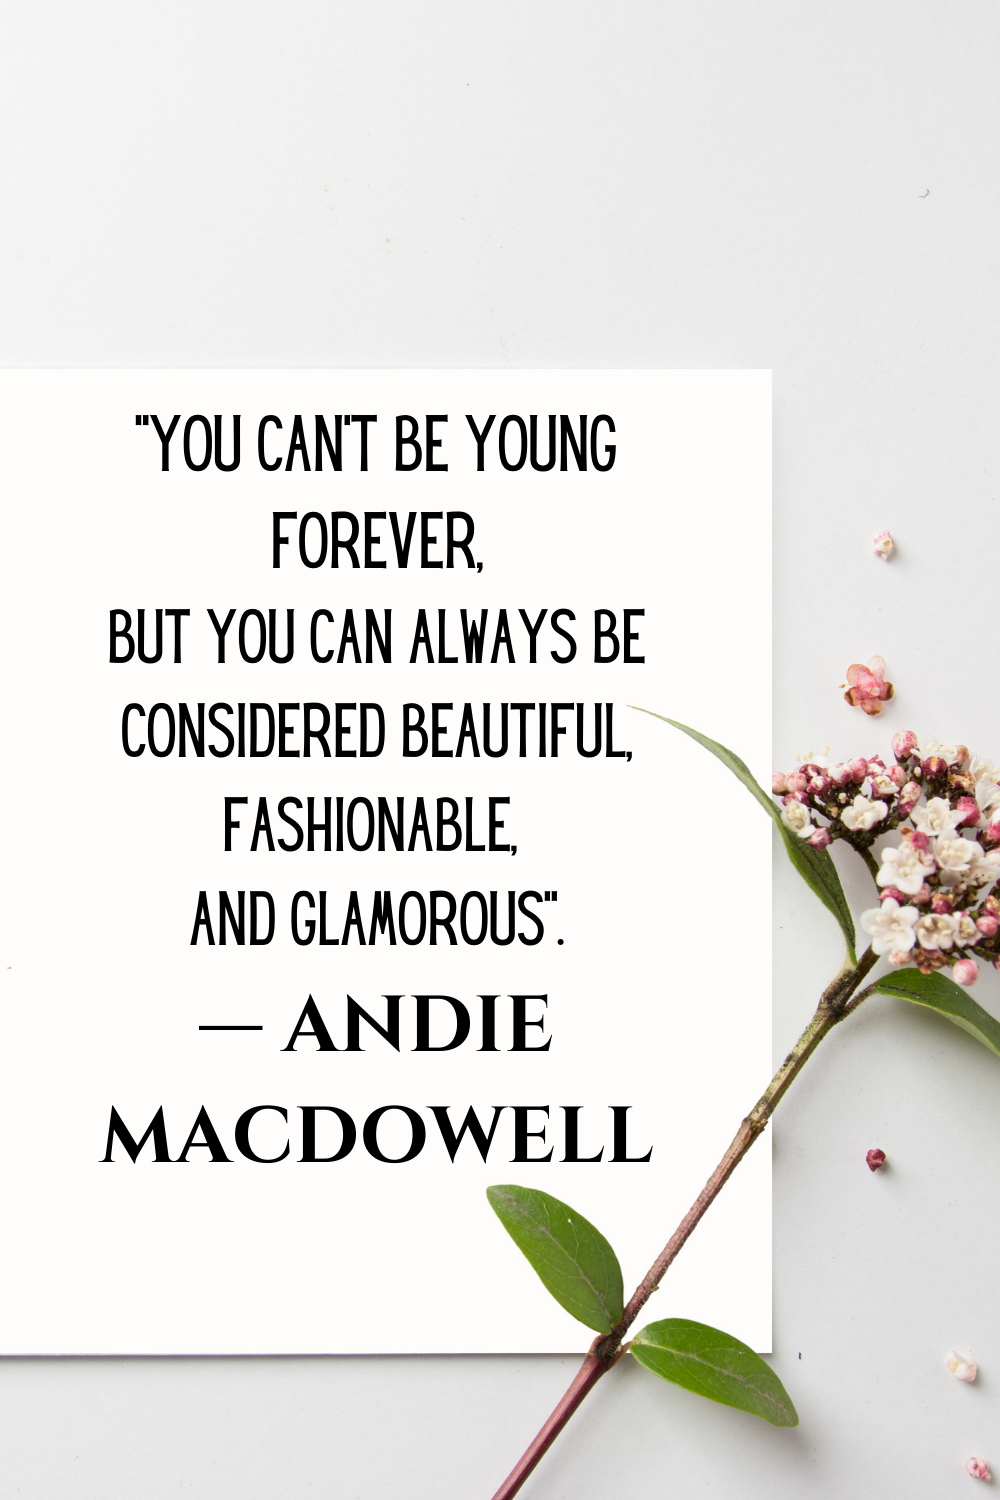 Andie MacDowell You can't be young forever quote